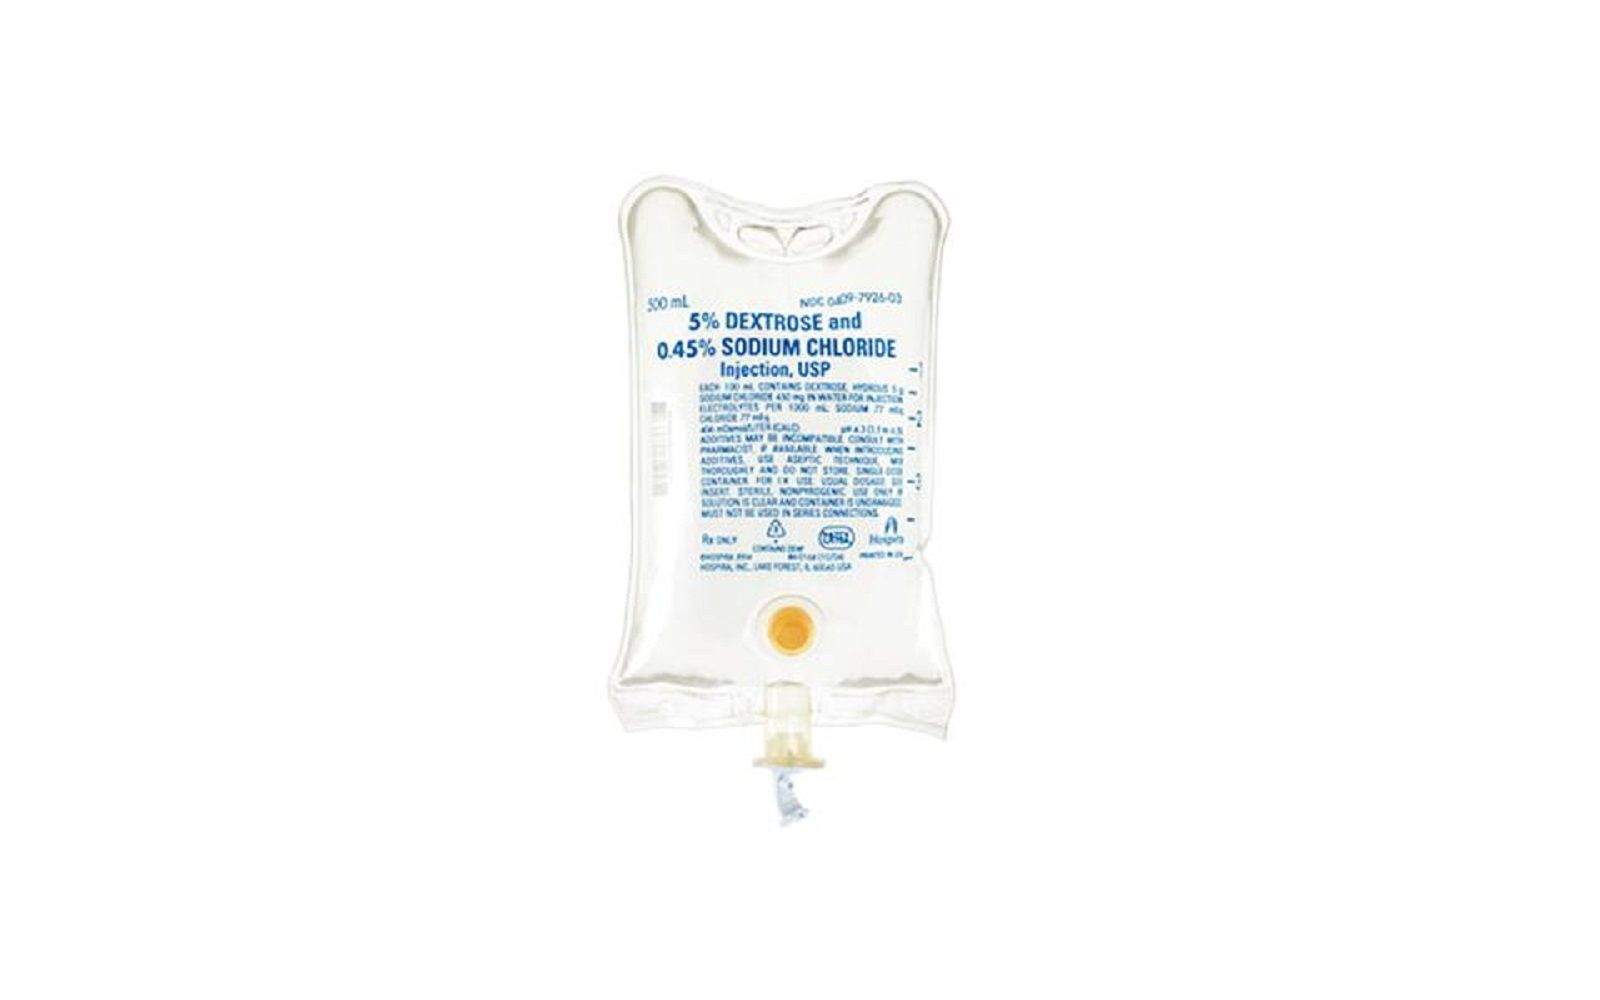 IV-Solution-Dextrose-5-and-0.45-Sodium-Chloride-Injection-USP-500-ml-Container